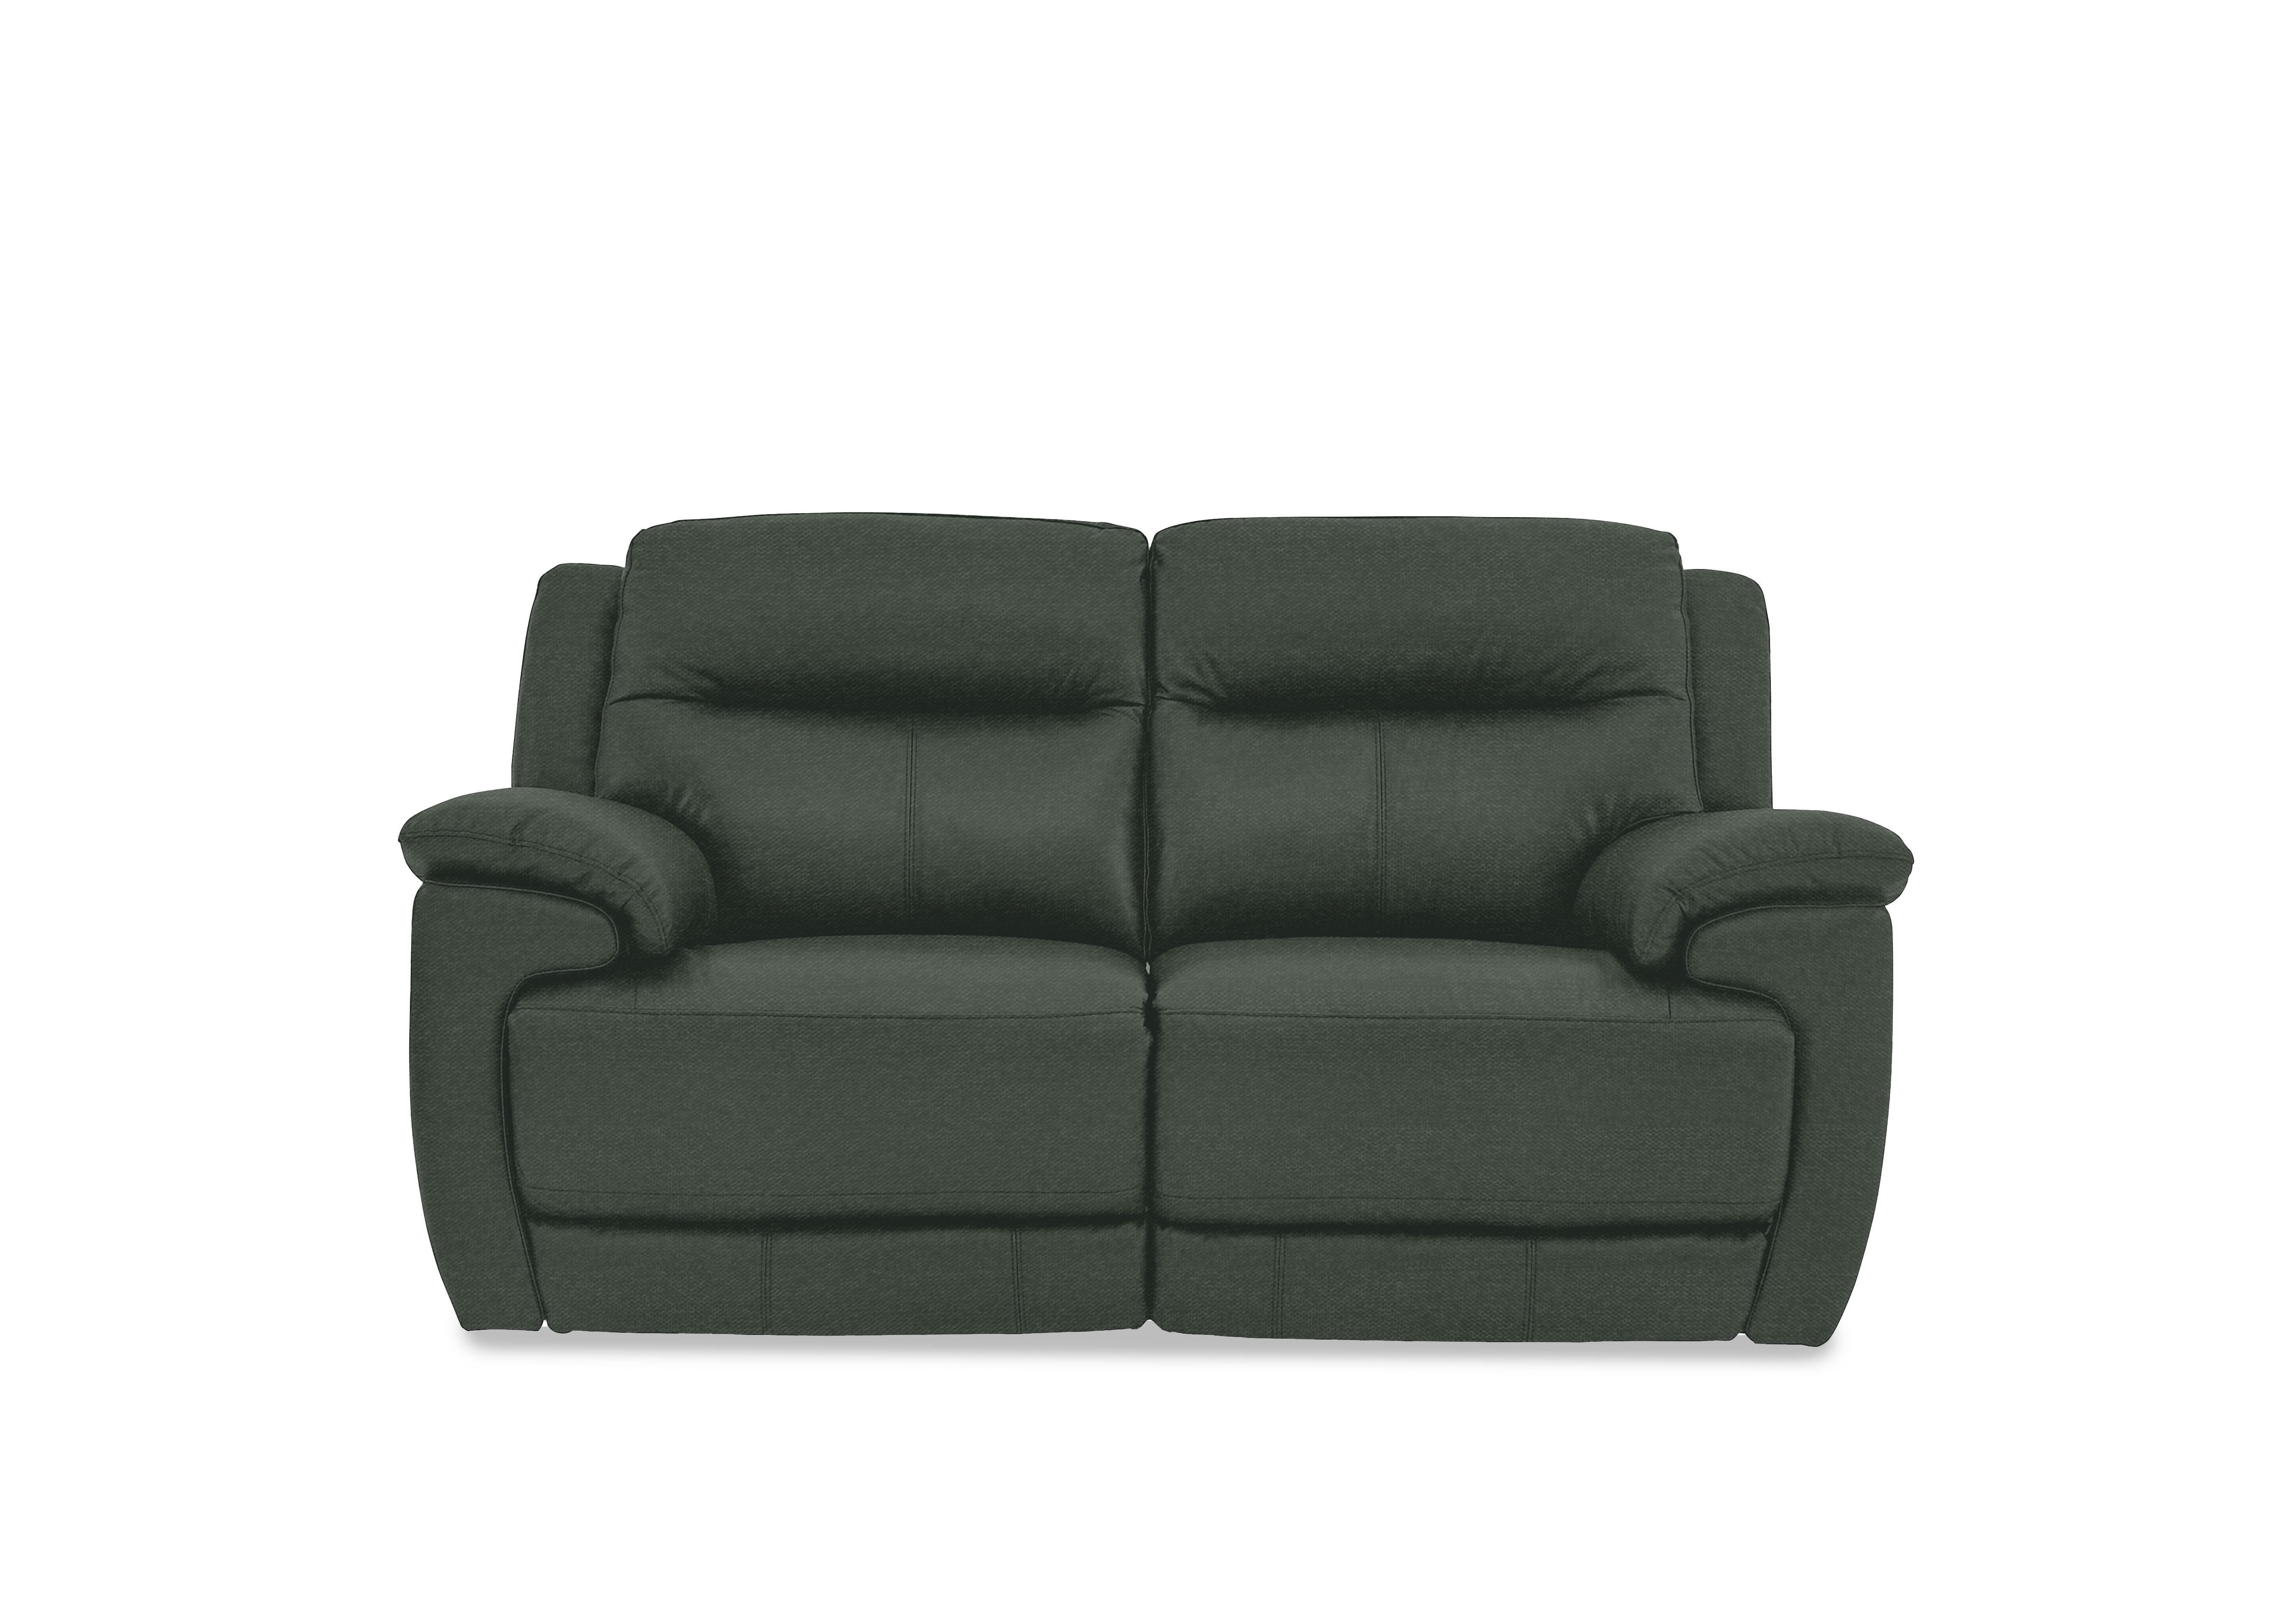 Touch 2 Seater Heavy Duty Fabric Sofa in Fab-Ska-R48 Moss Green on Furniture Village